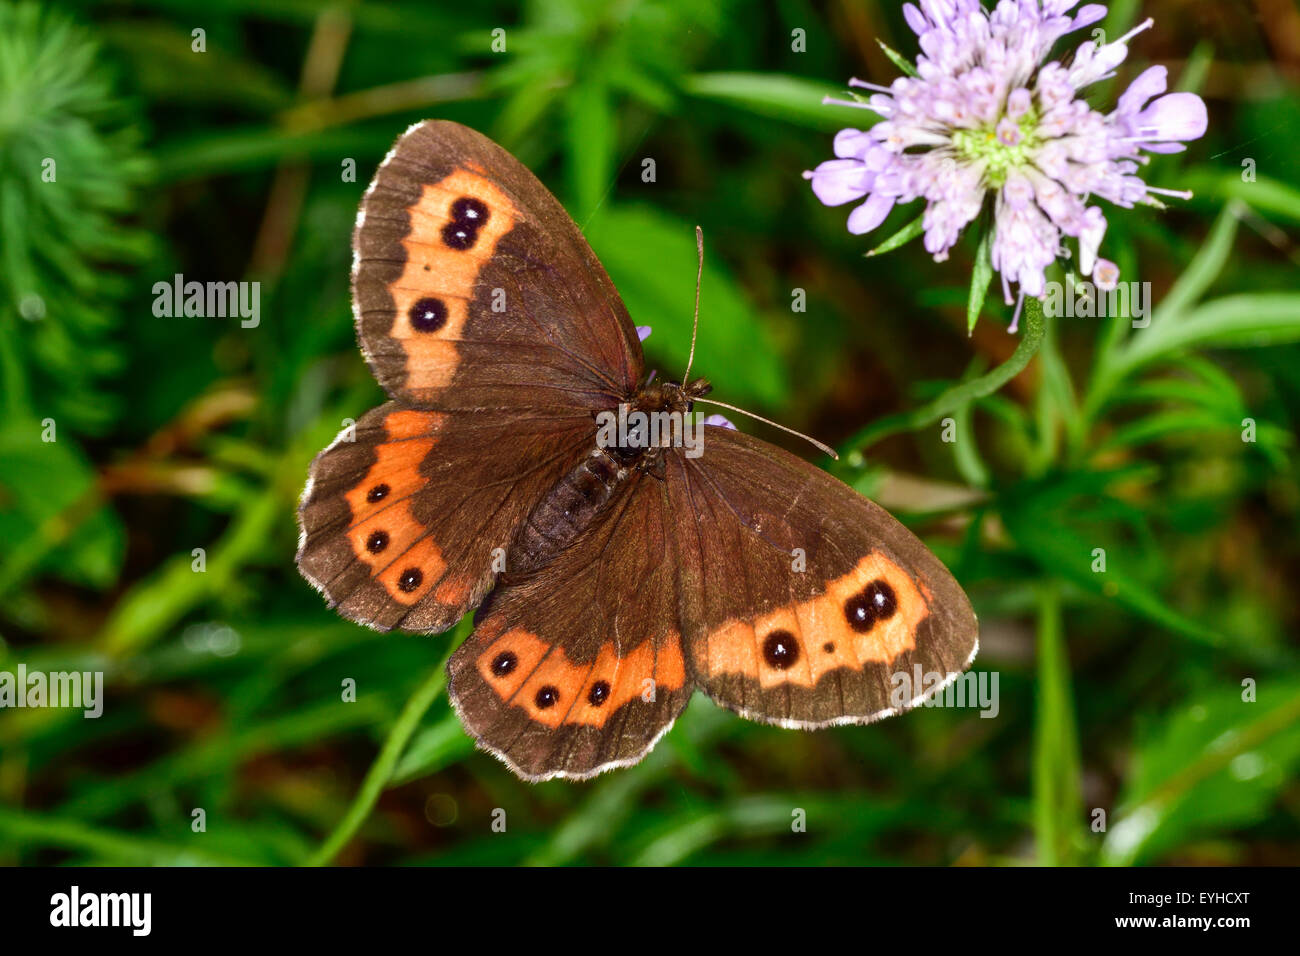 Closeup photo of the Bright-eyed Ringlet butterfly. Stock Photo